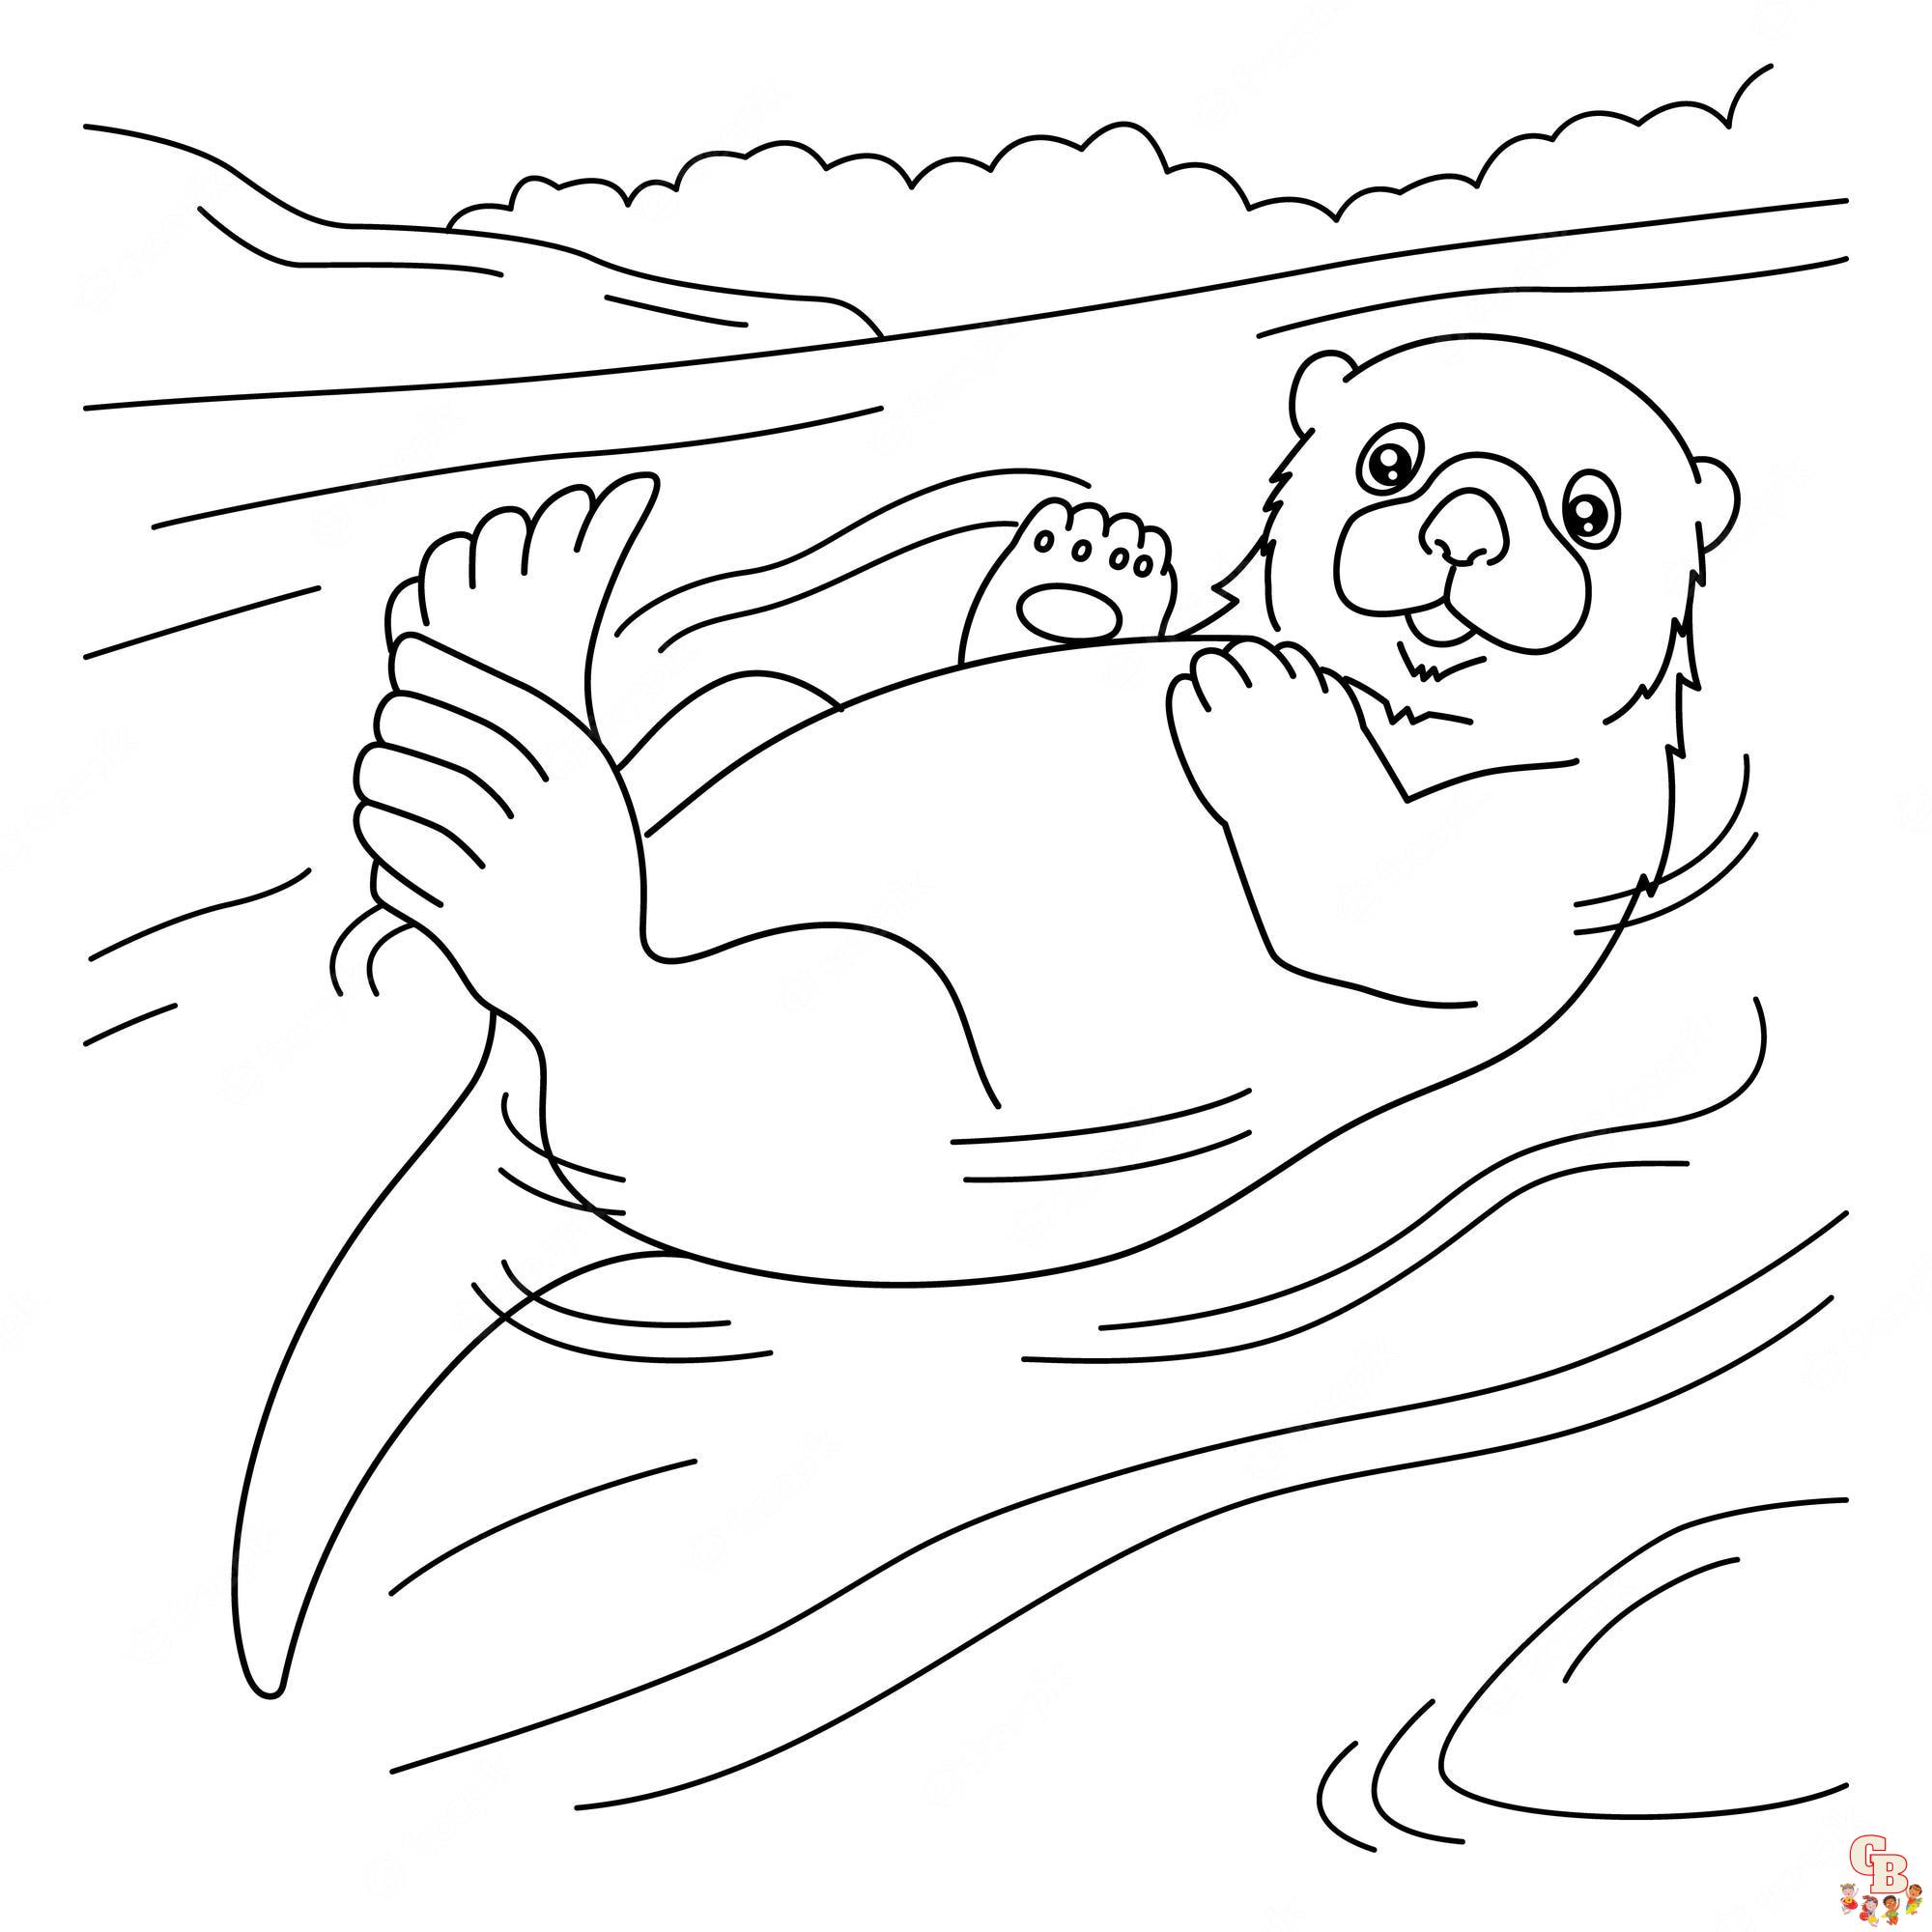 Otter Coloring Pages 12